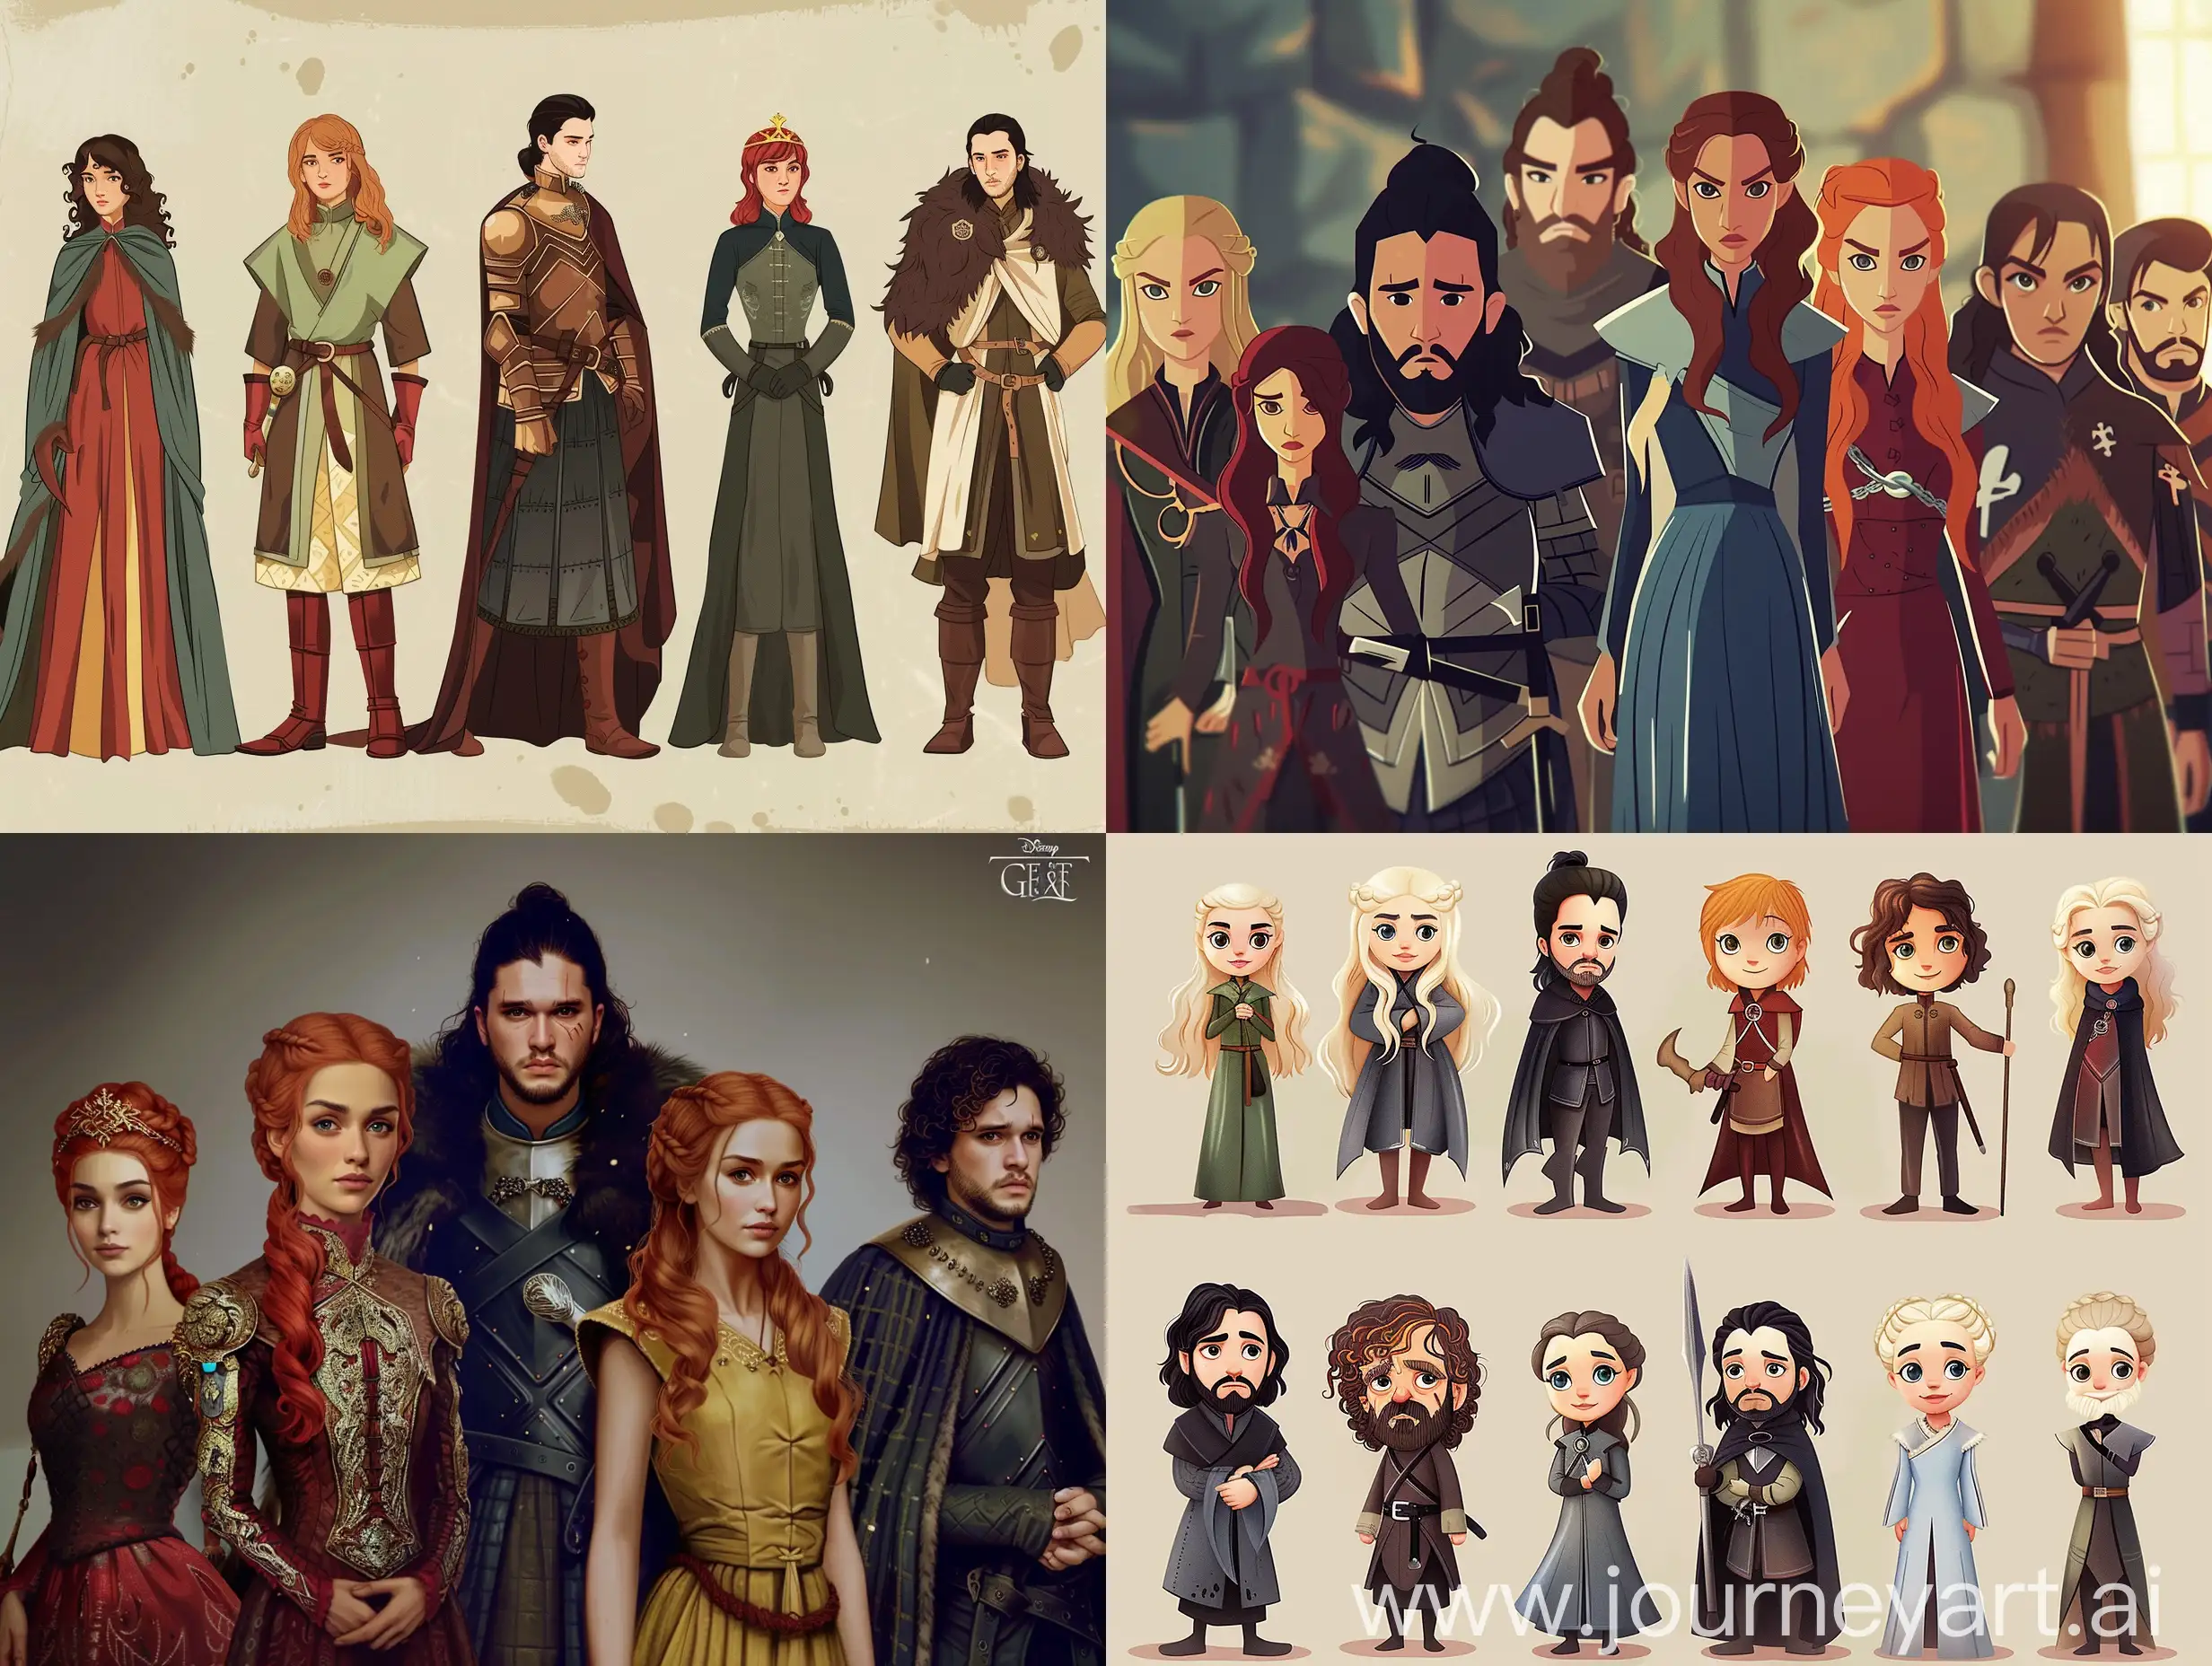 Disney-Renaissance-Style-Depiction-of-Game-of-Thrones-Characters